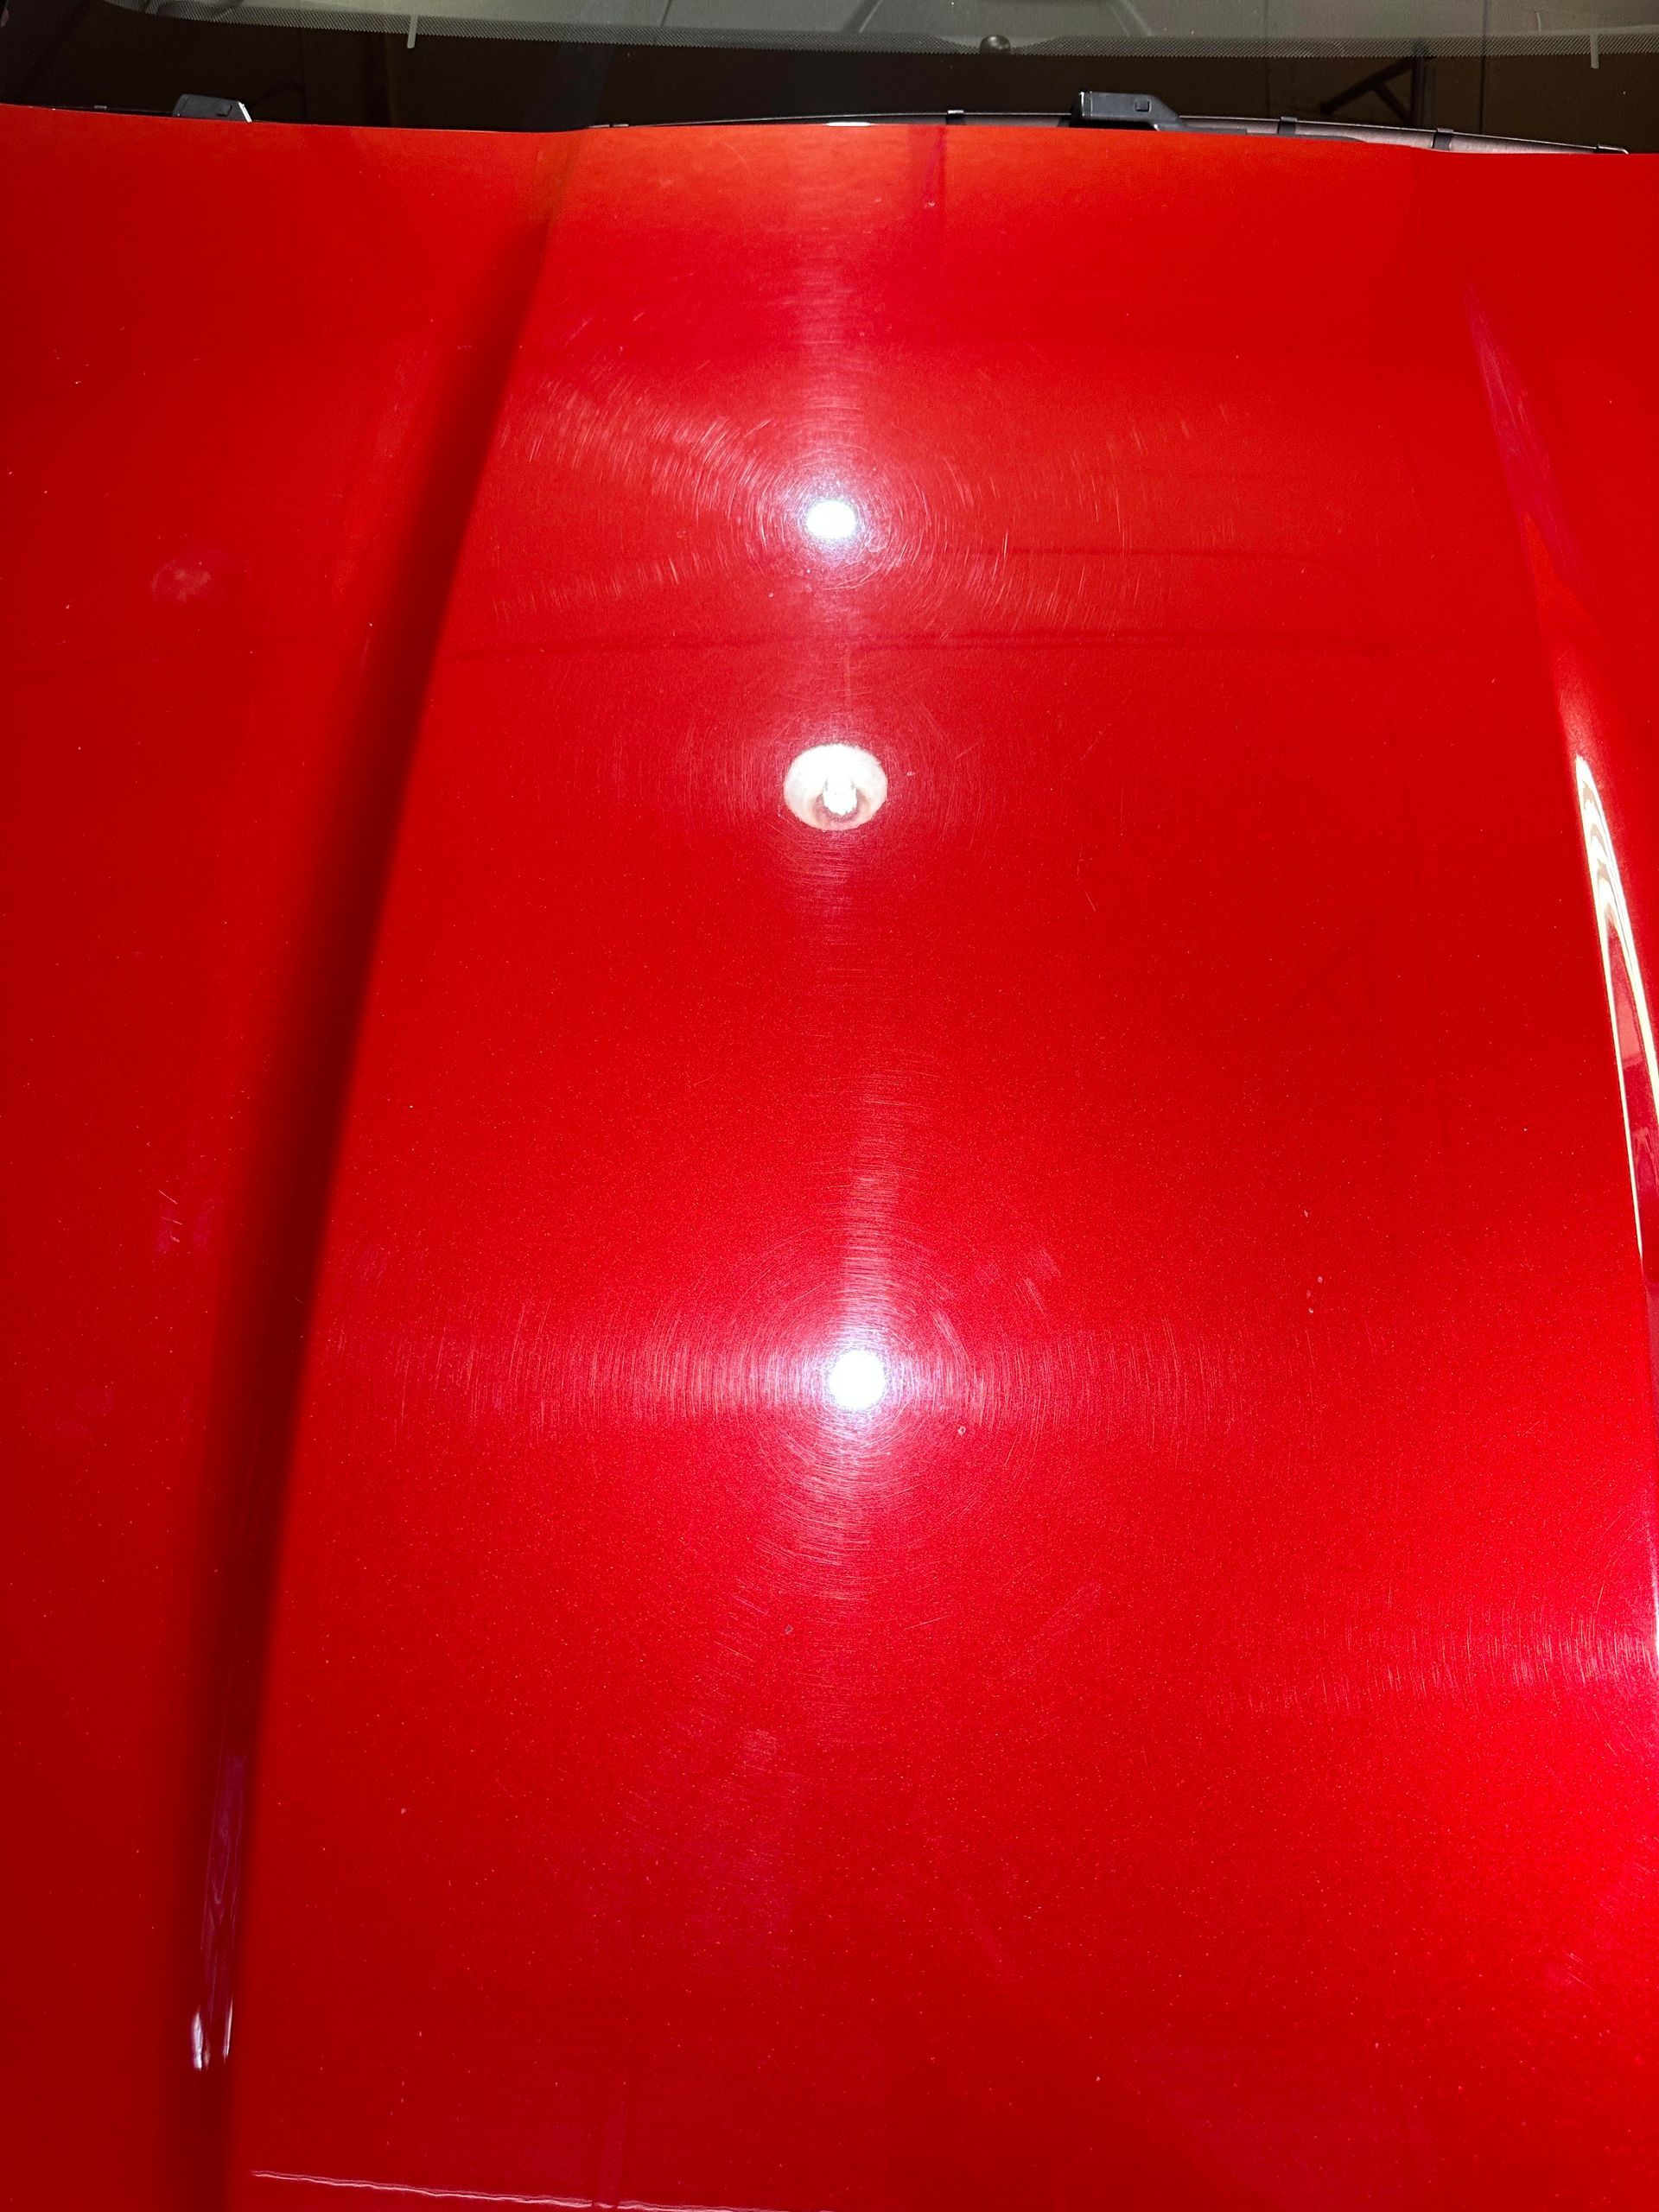 a close up of a red car hood with a light shining through it .